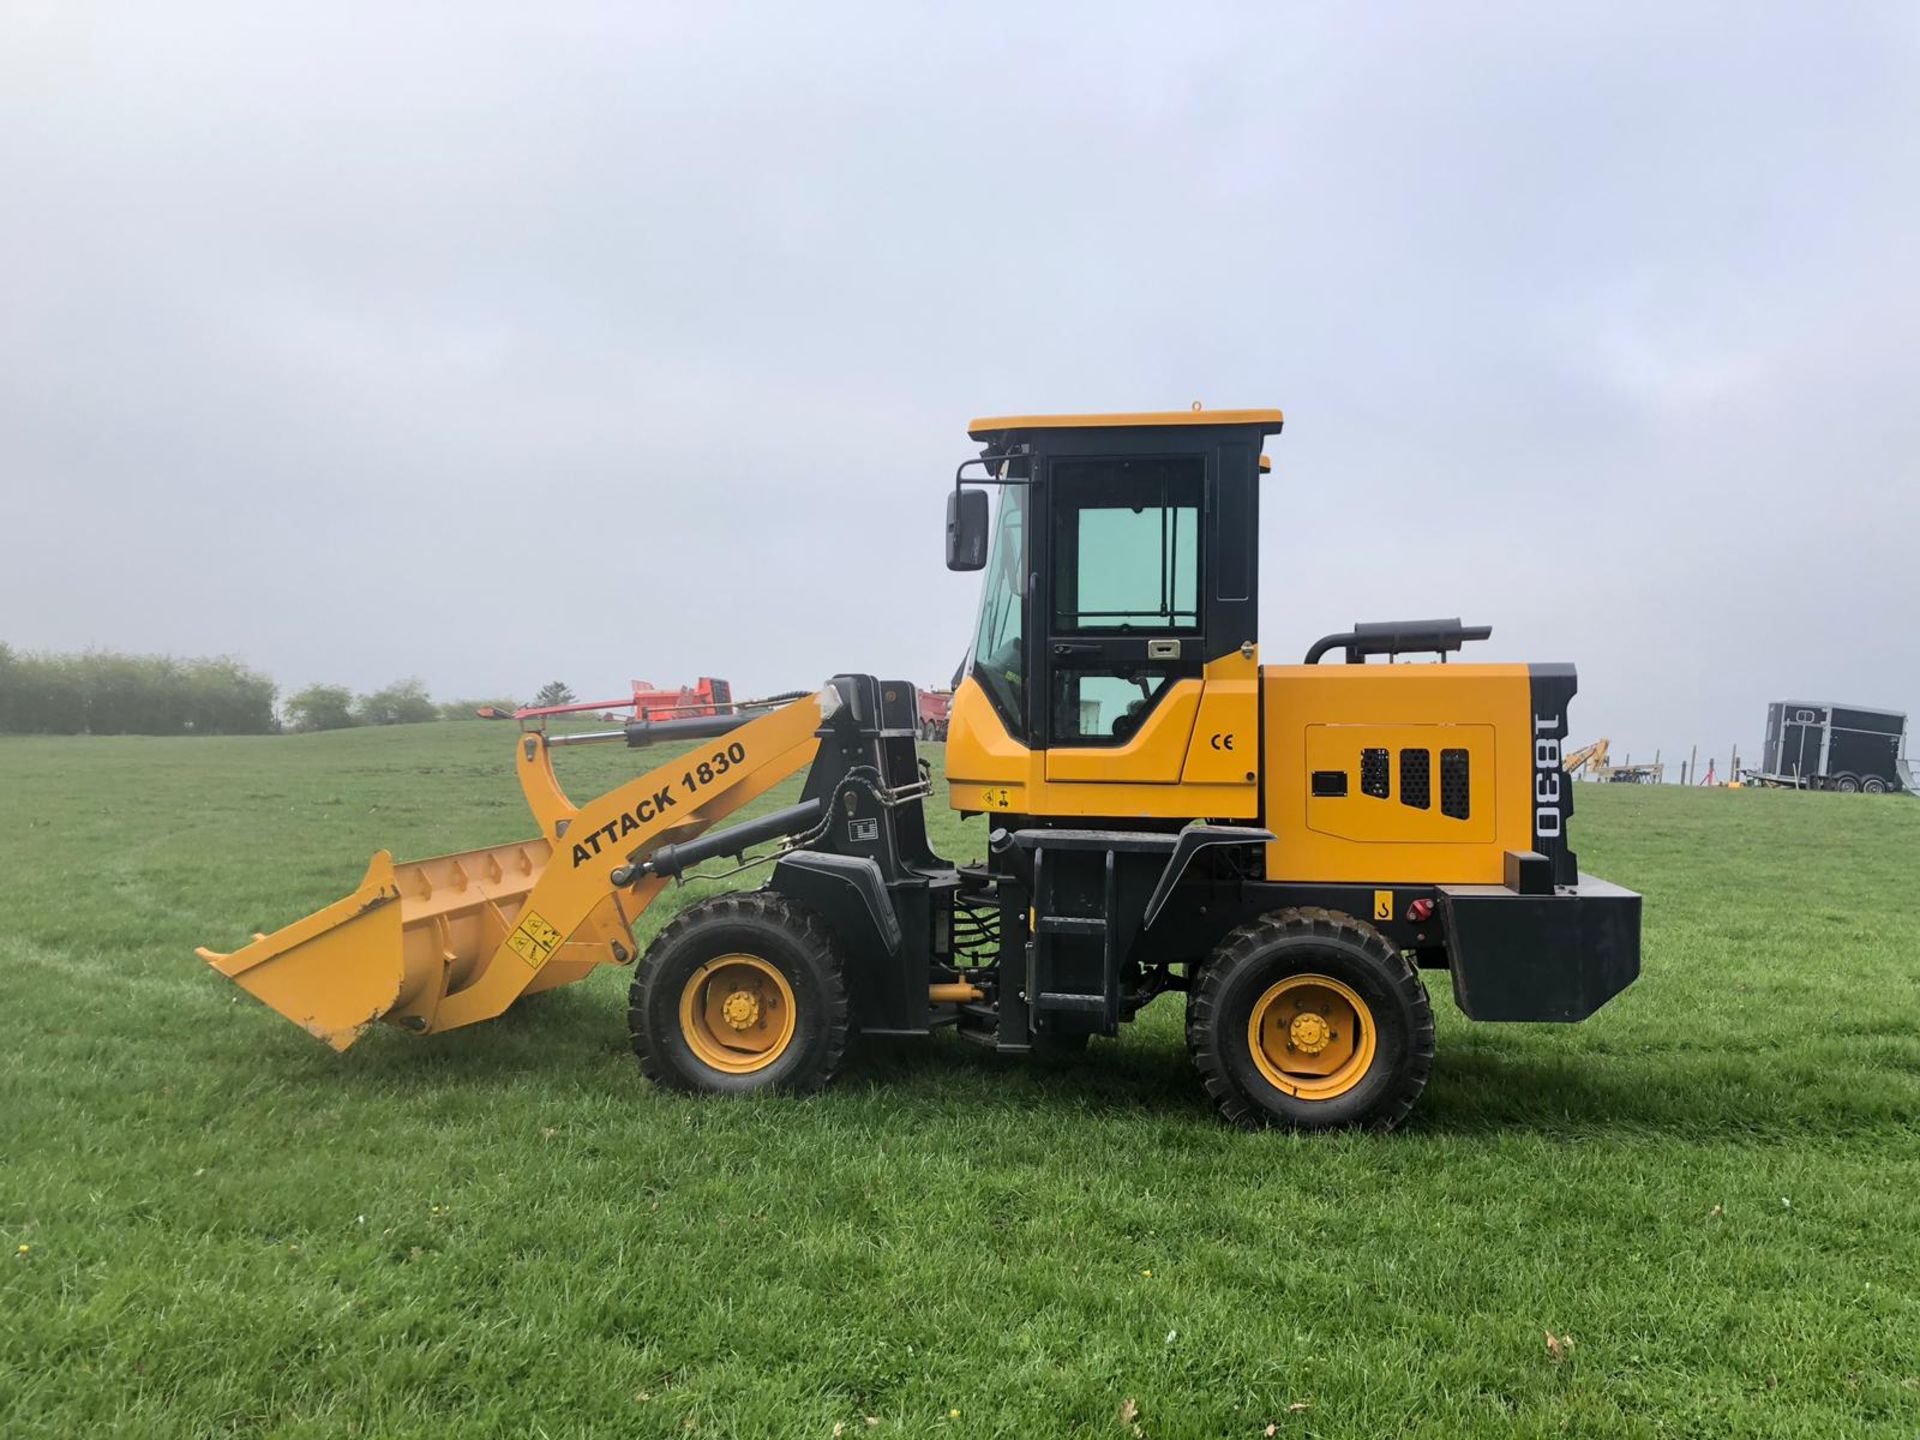 2019 BRAND NEW AND UNUSED ATTACK 1830 WHEEL LOADER, RUNS WORKS AND LIFTS *PLUS VAT* - Image 2 of 8